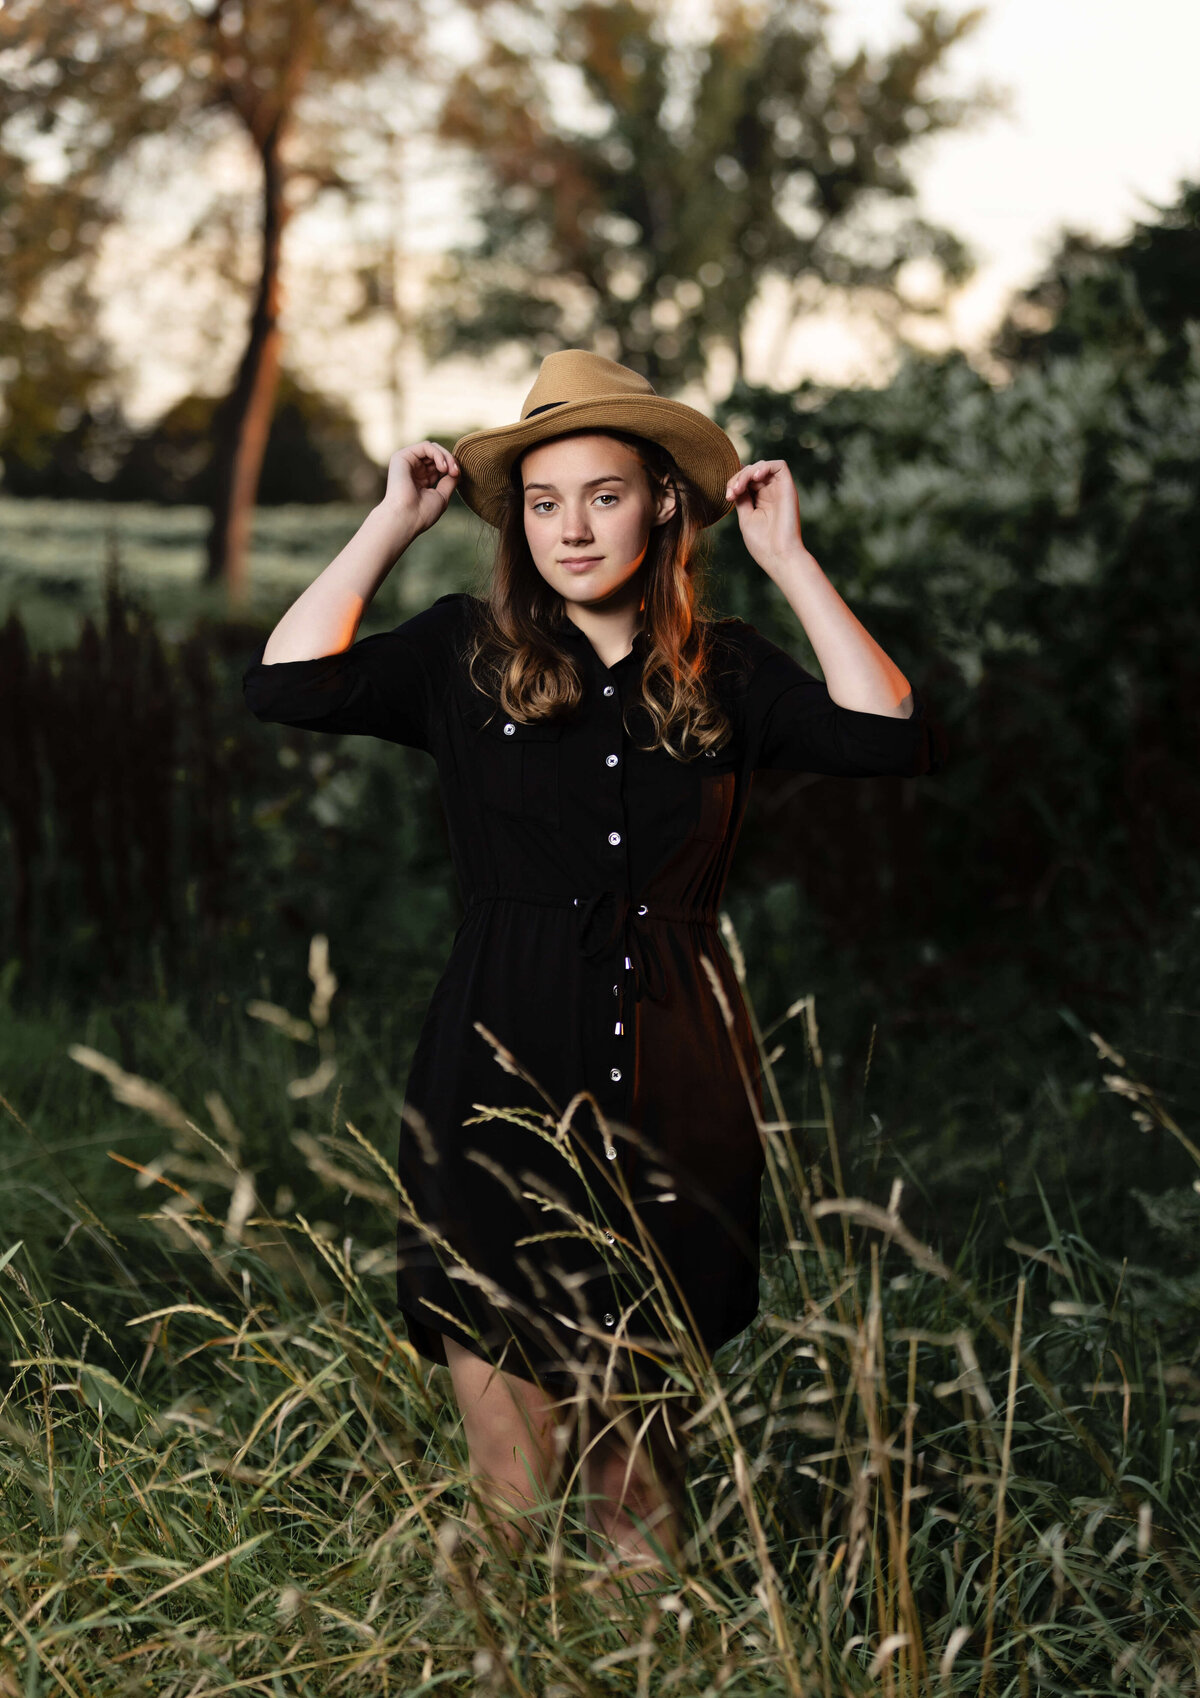 Senior photo of a girl with a hat on in an Erie Pa field